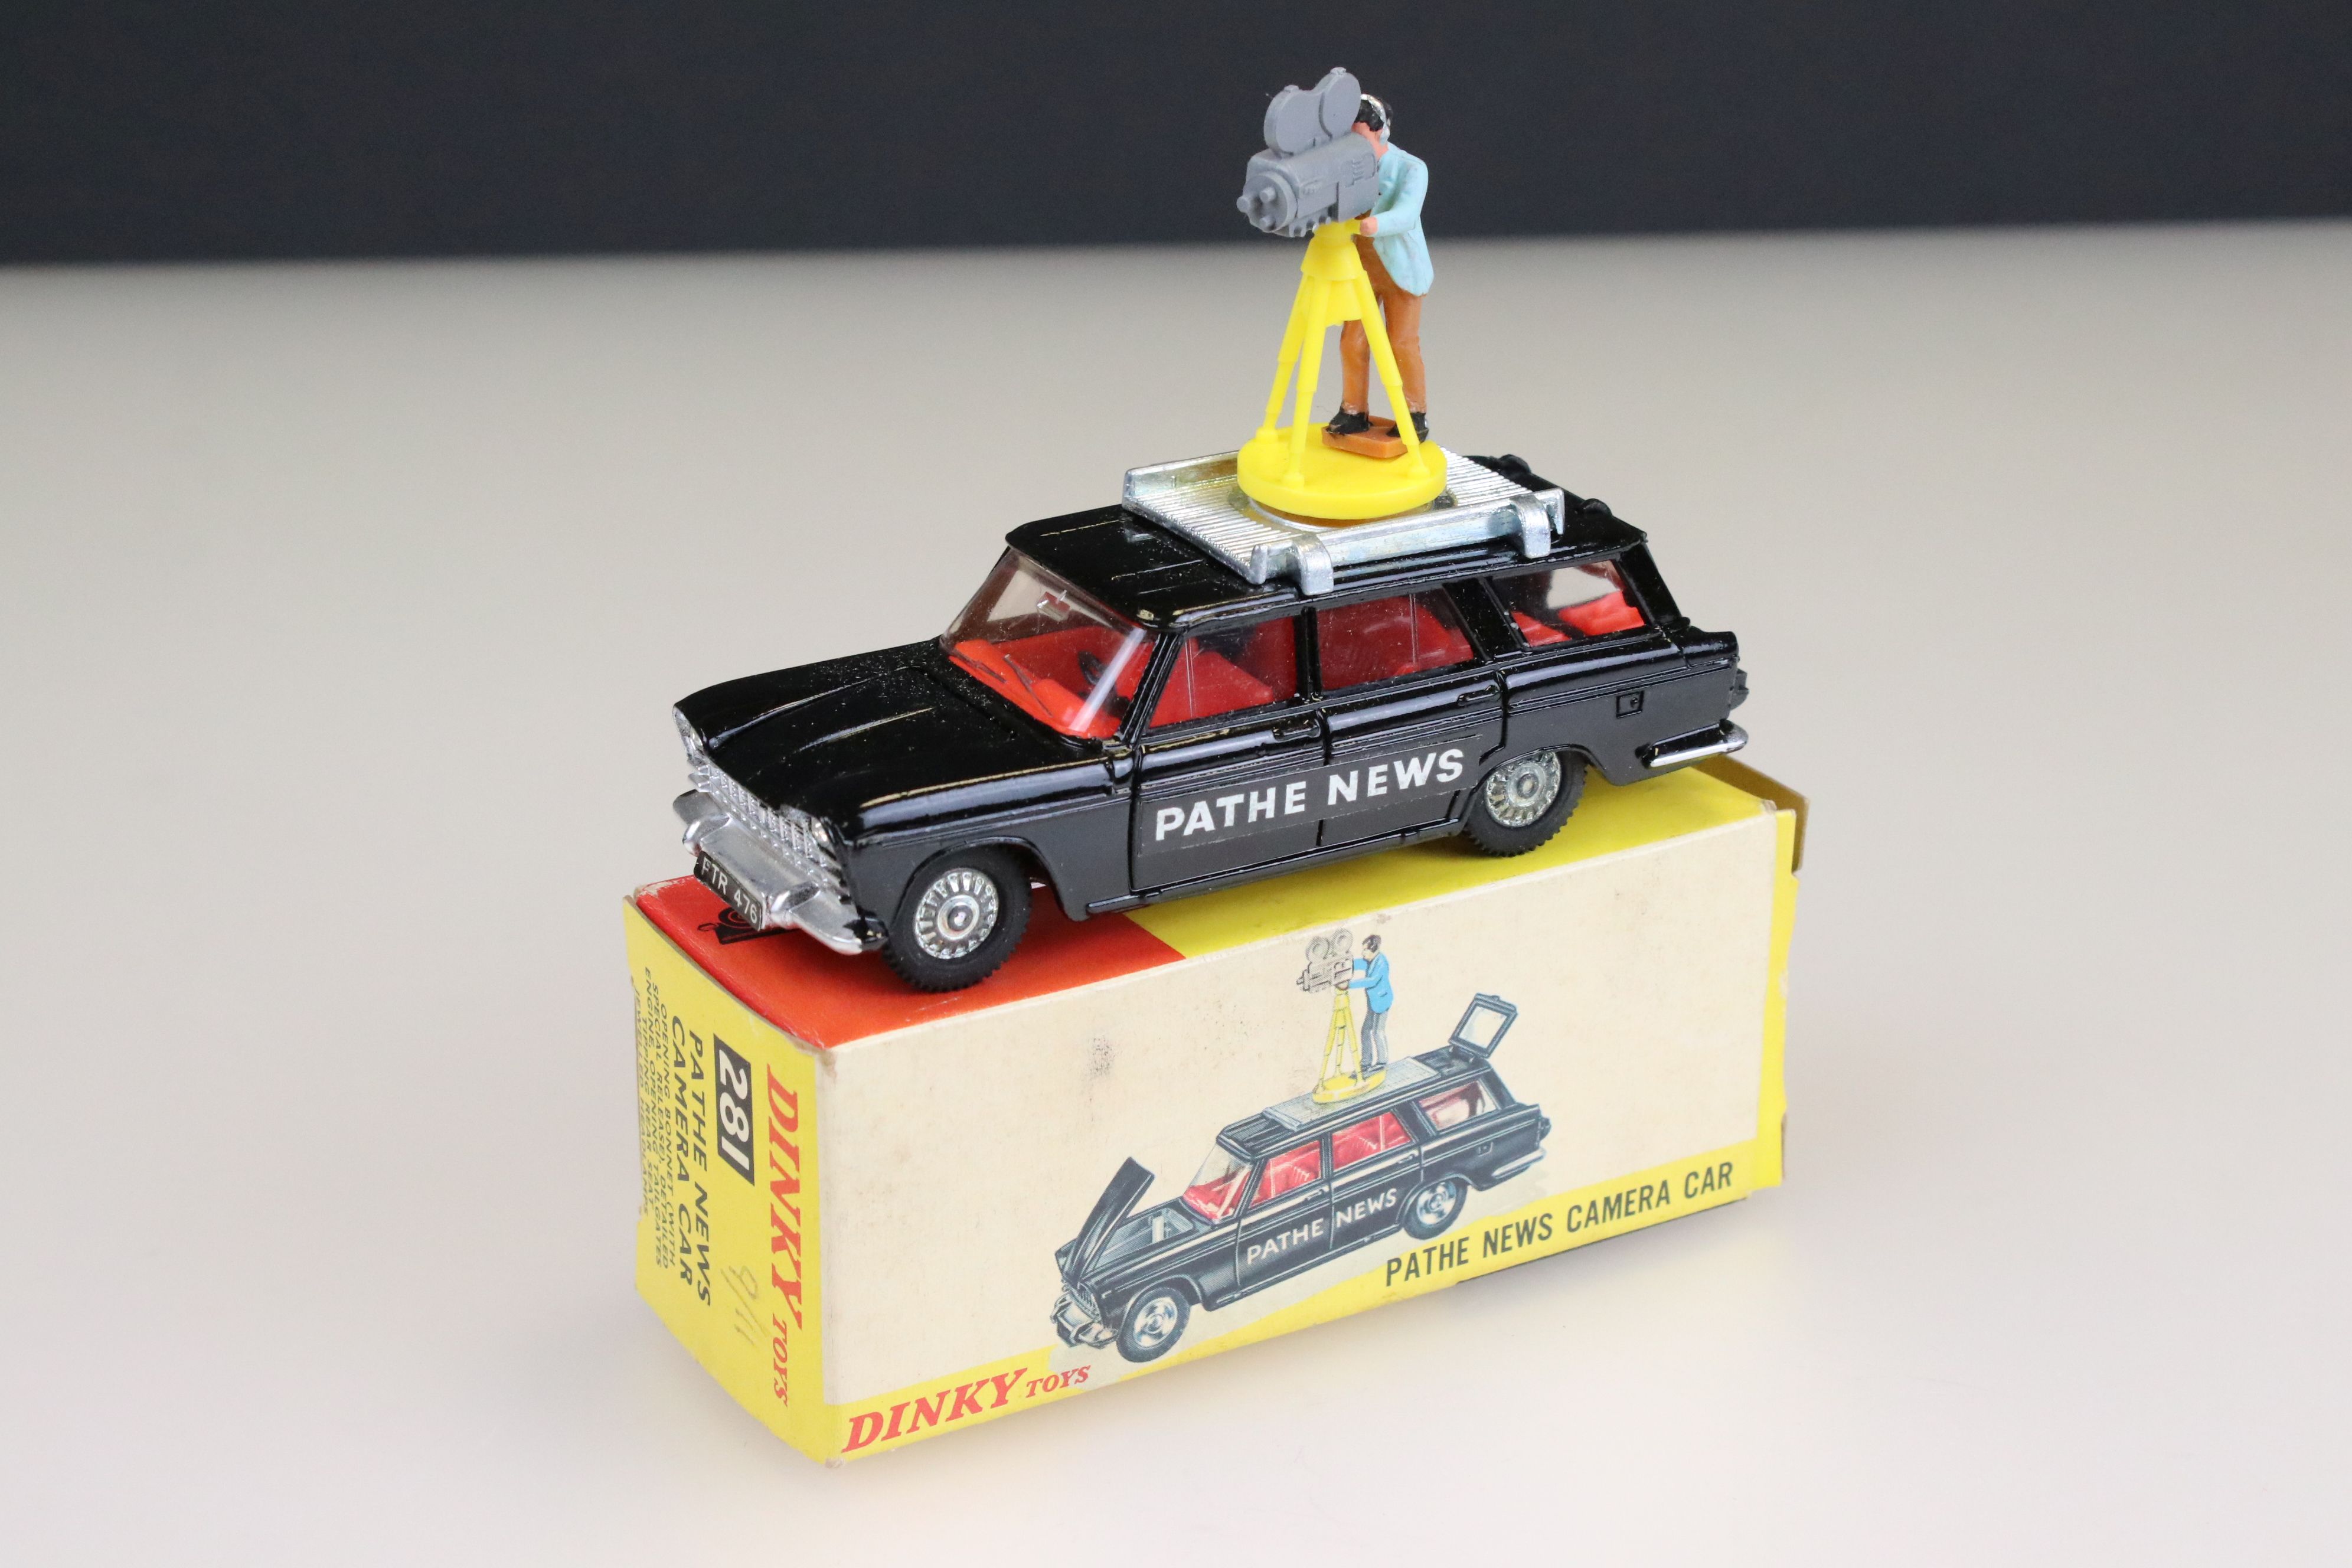 Boxed Dinky 281 Pathe News Camera Car diecast model complete with cameraman figure, diecast & decals